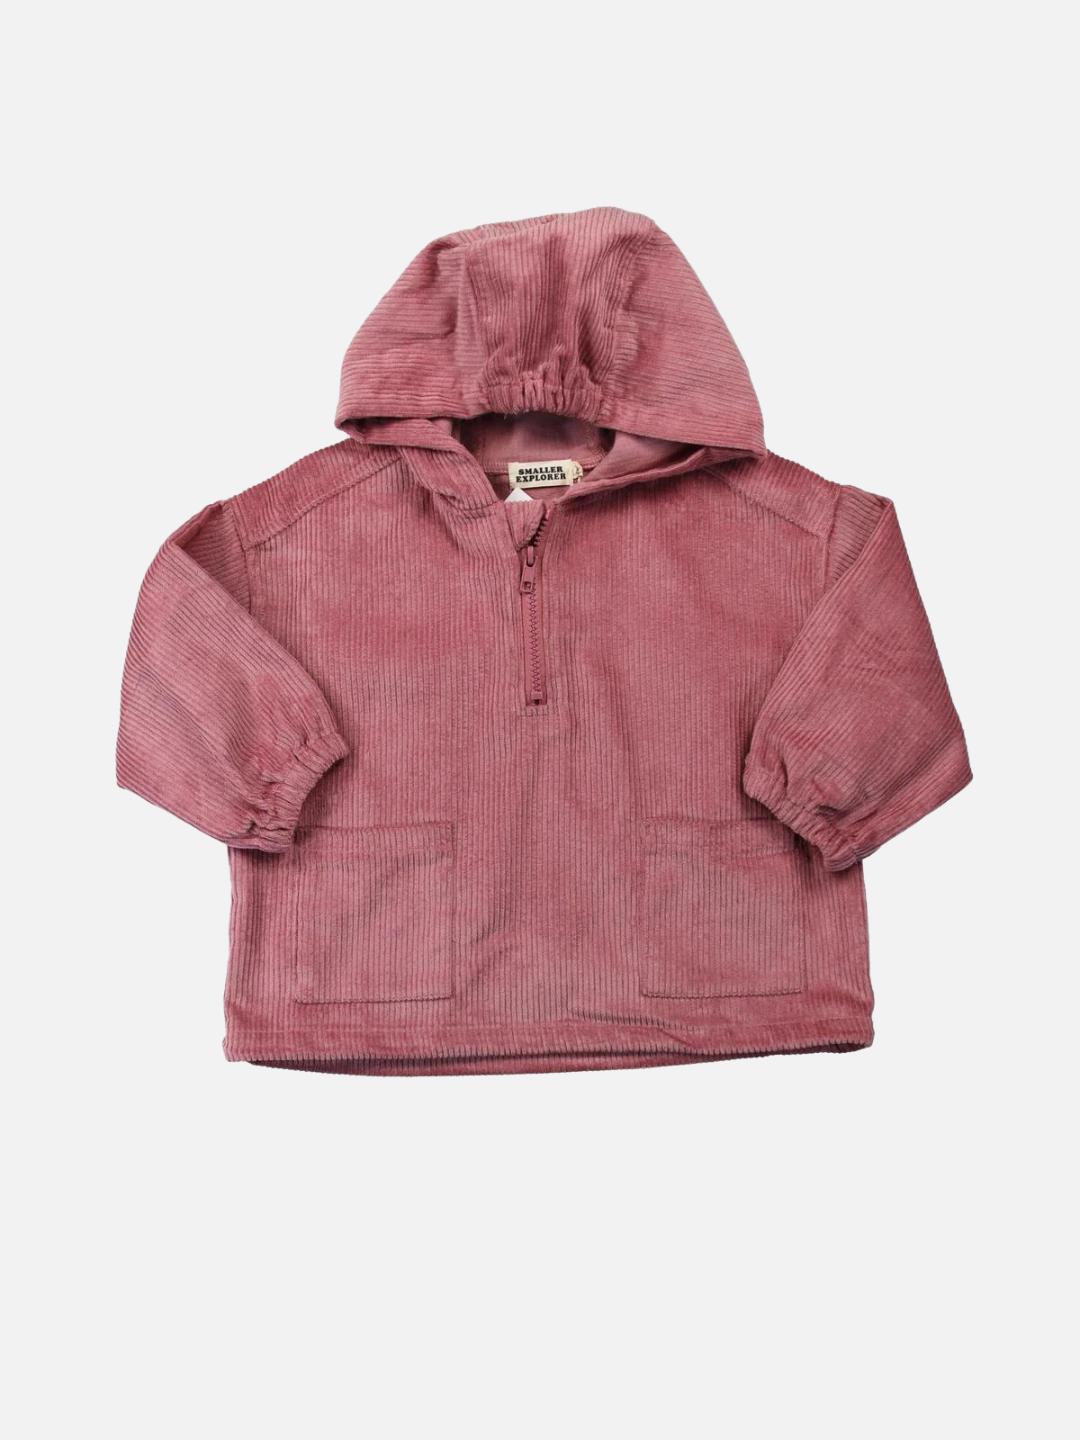 A kids' hooded smock top in dusty pink, front view